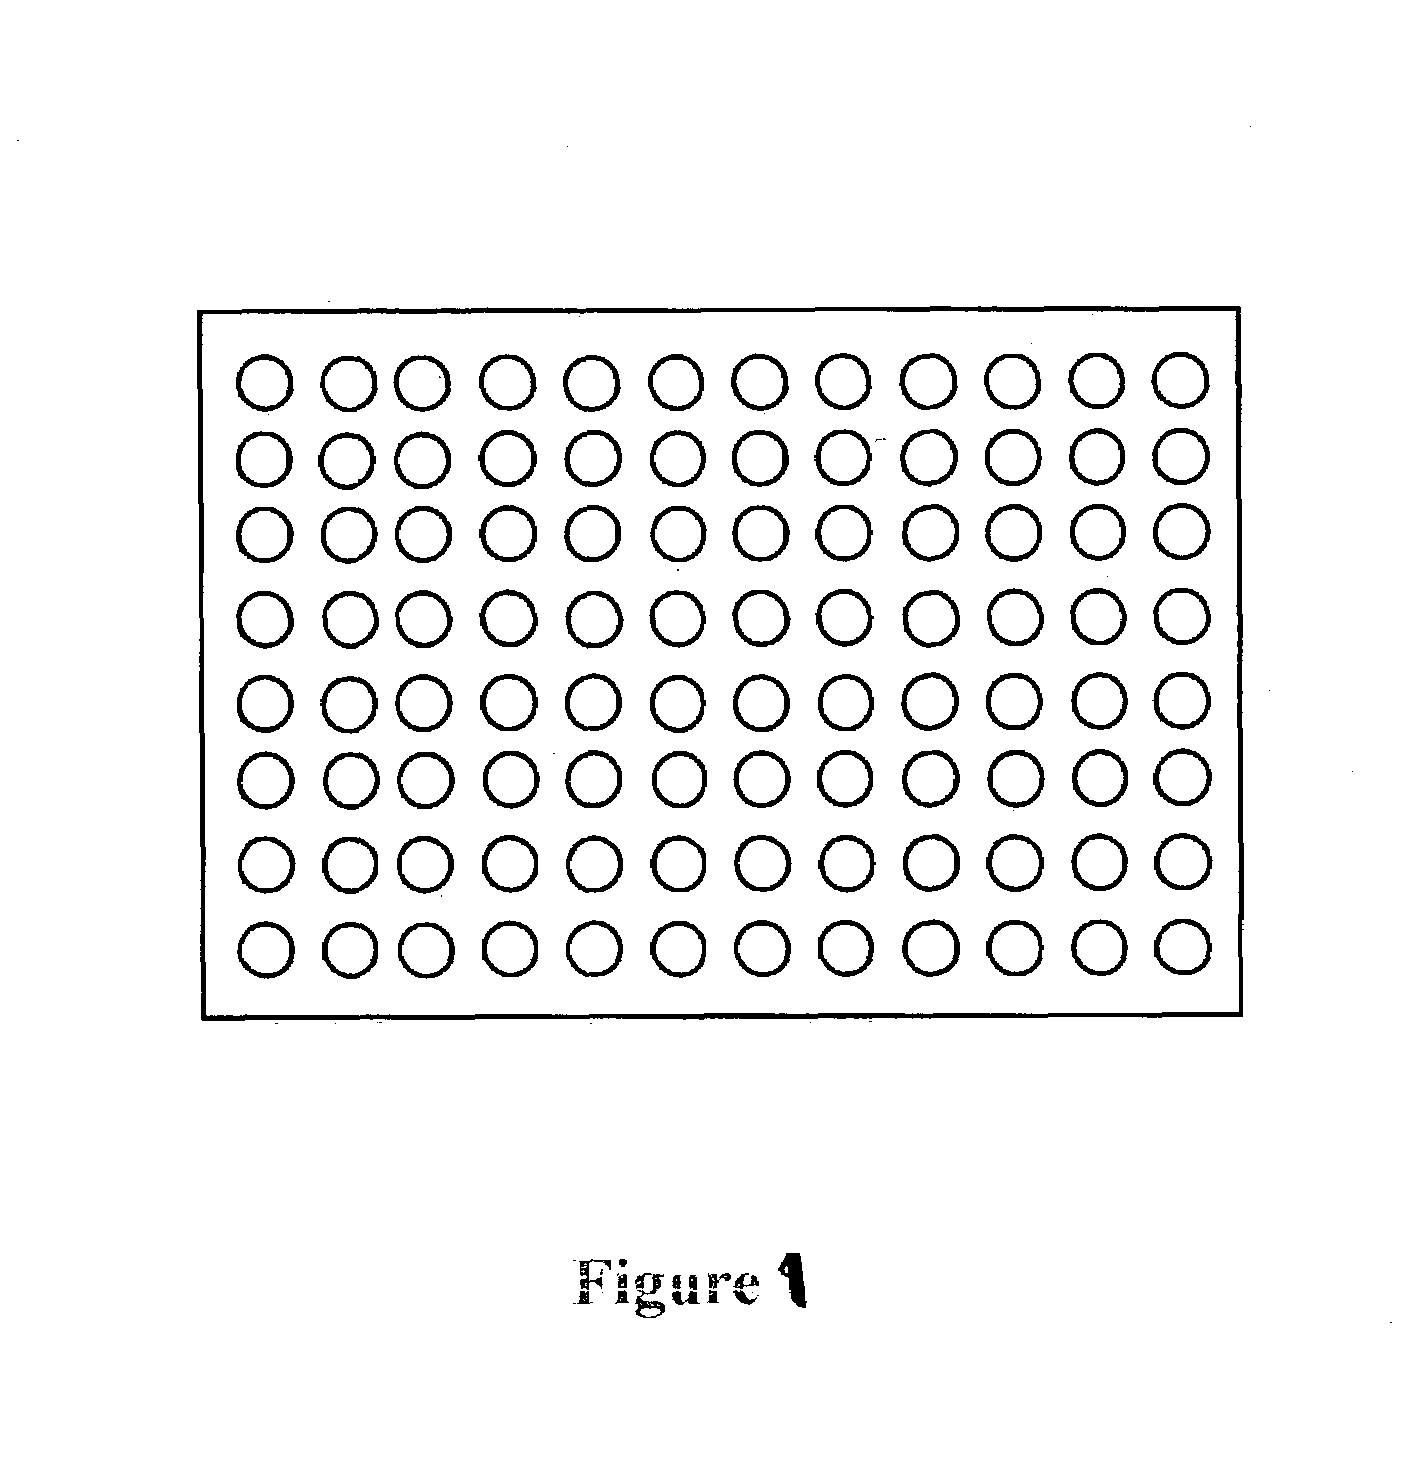 Pattern adhesive seal products and method of production